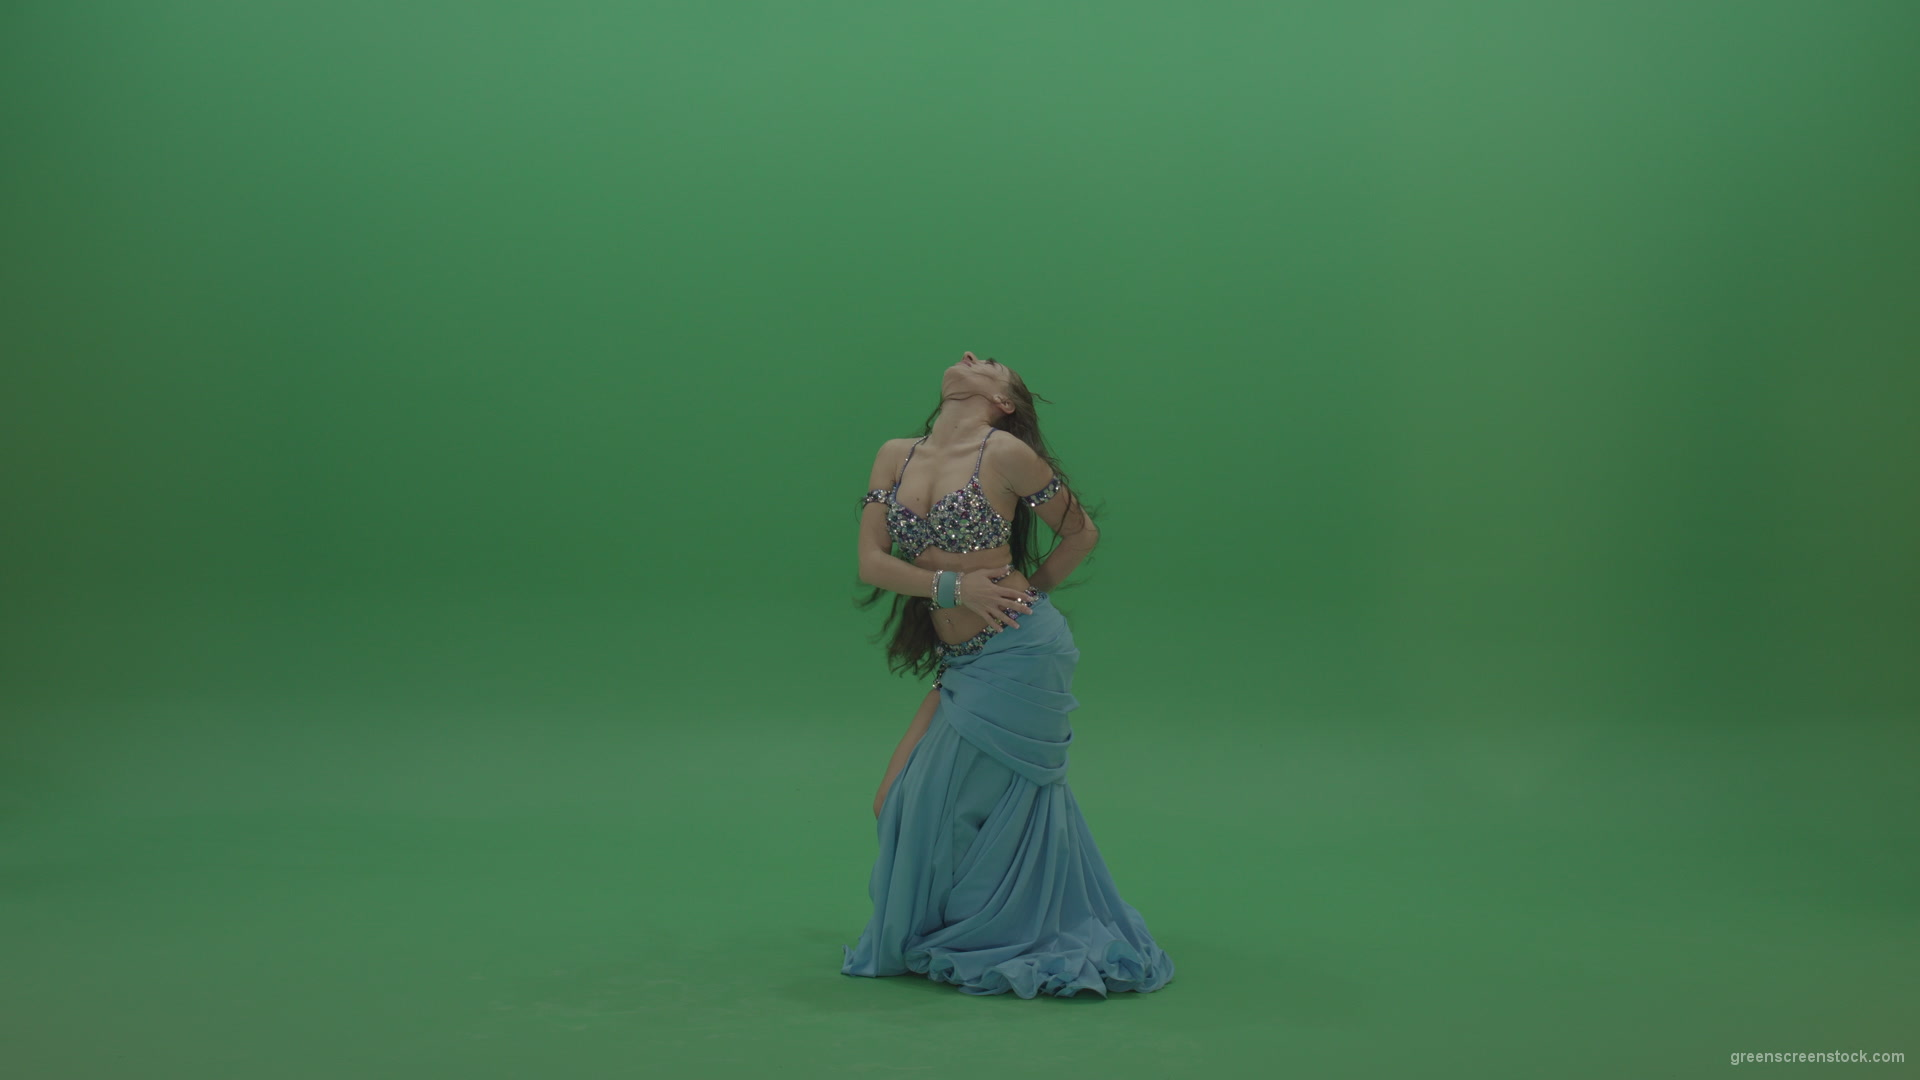 Fair-belly-dancer-in-blue-wear-display-amazing-dance-moves-over-chromakey-background_009 Green Screen Stock